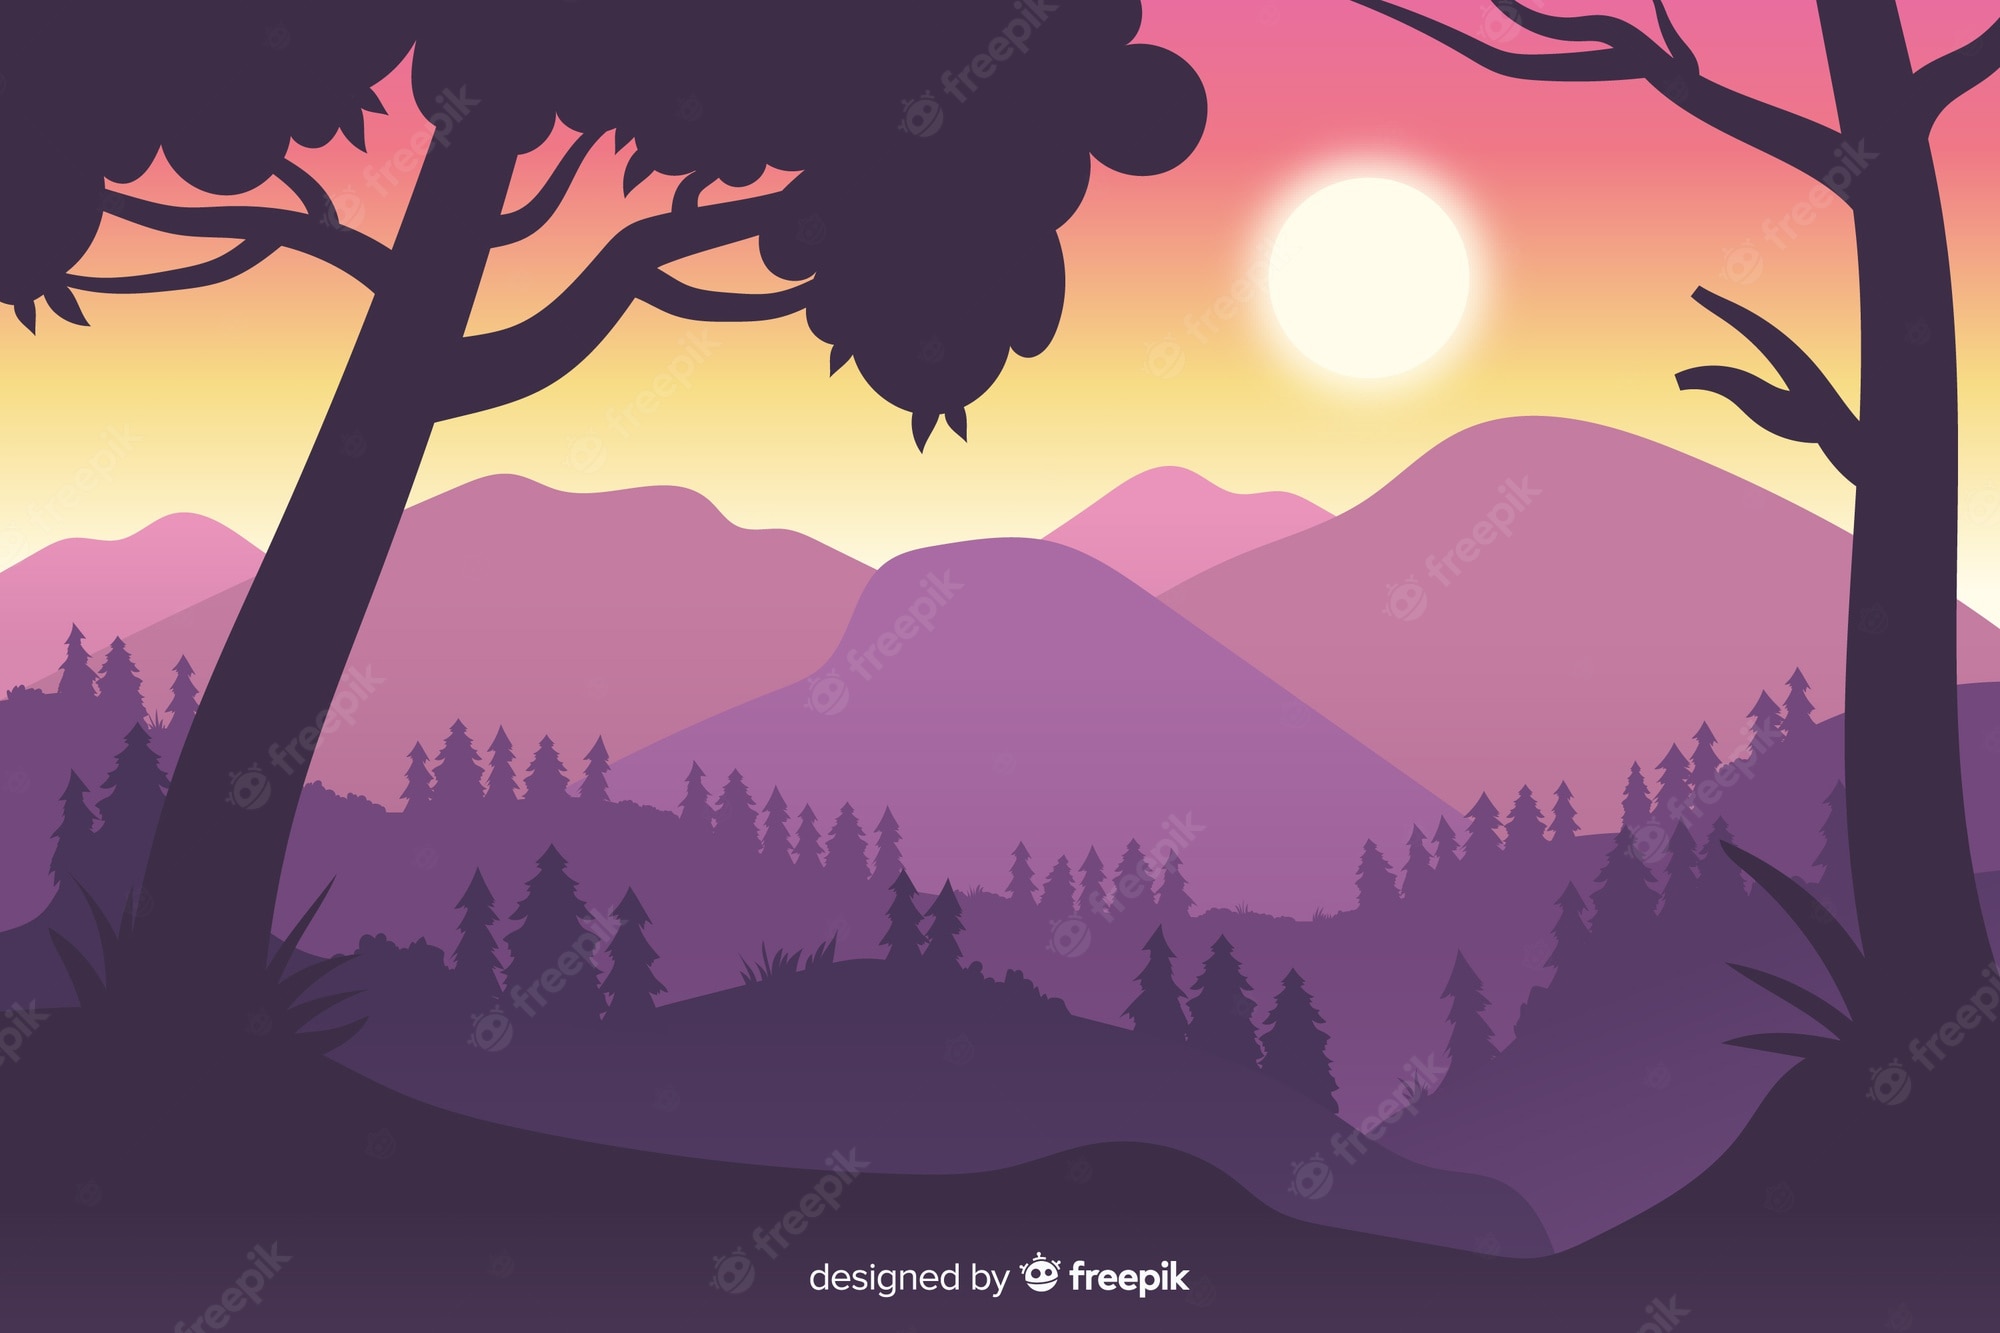 Mountains Silhouette Wallpapers